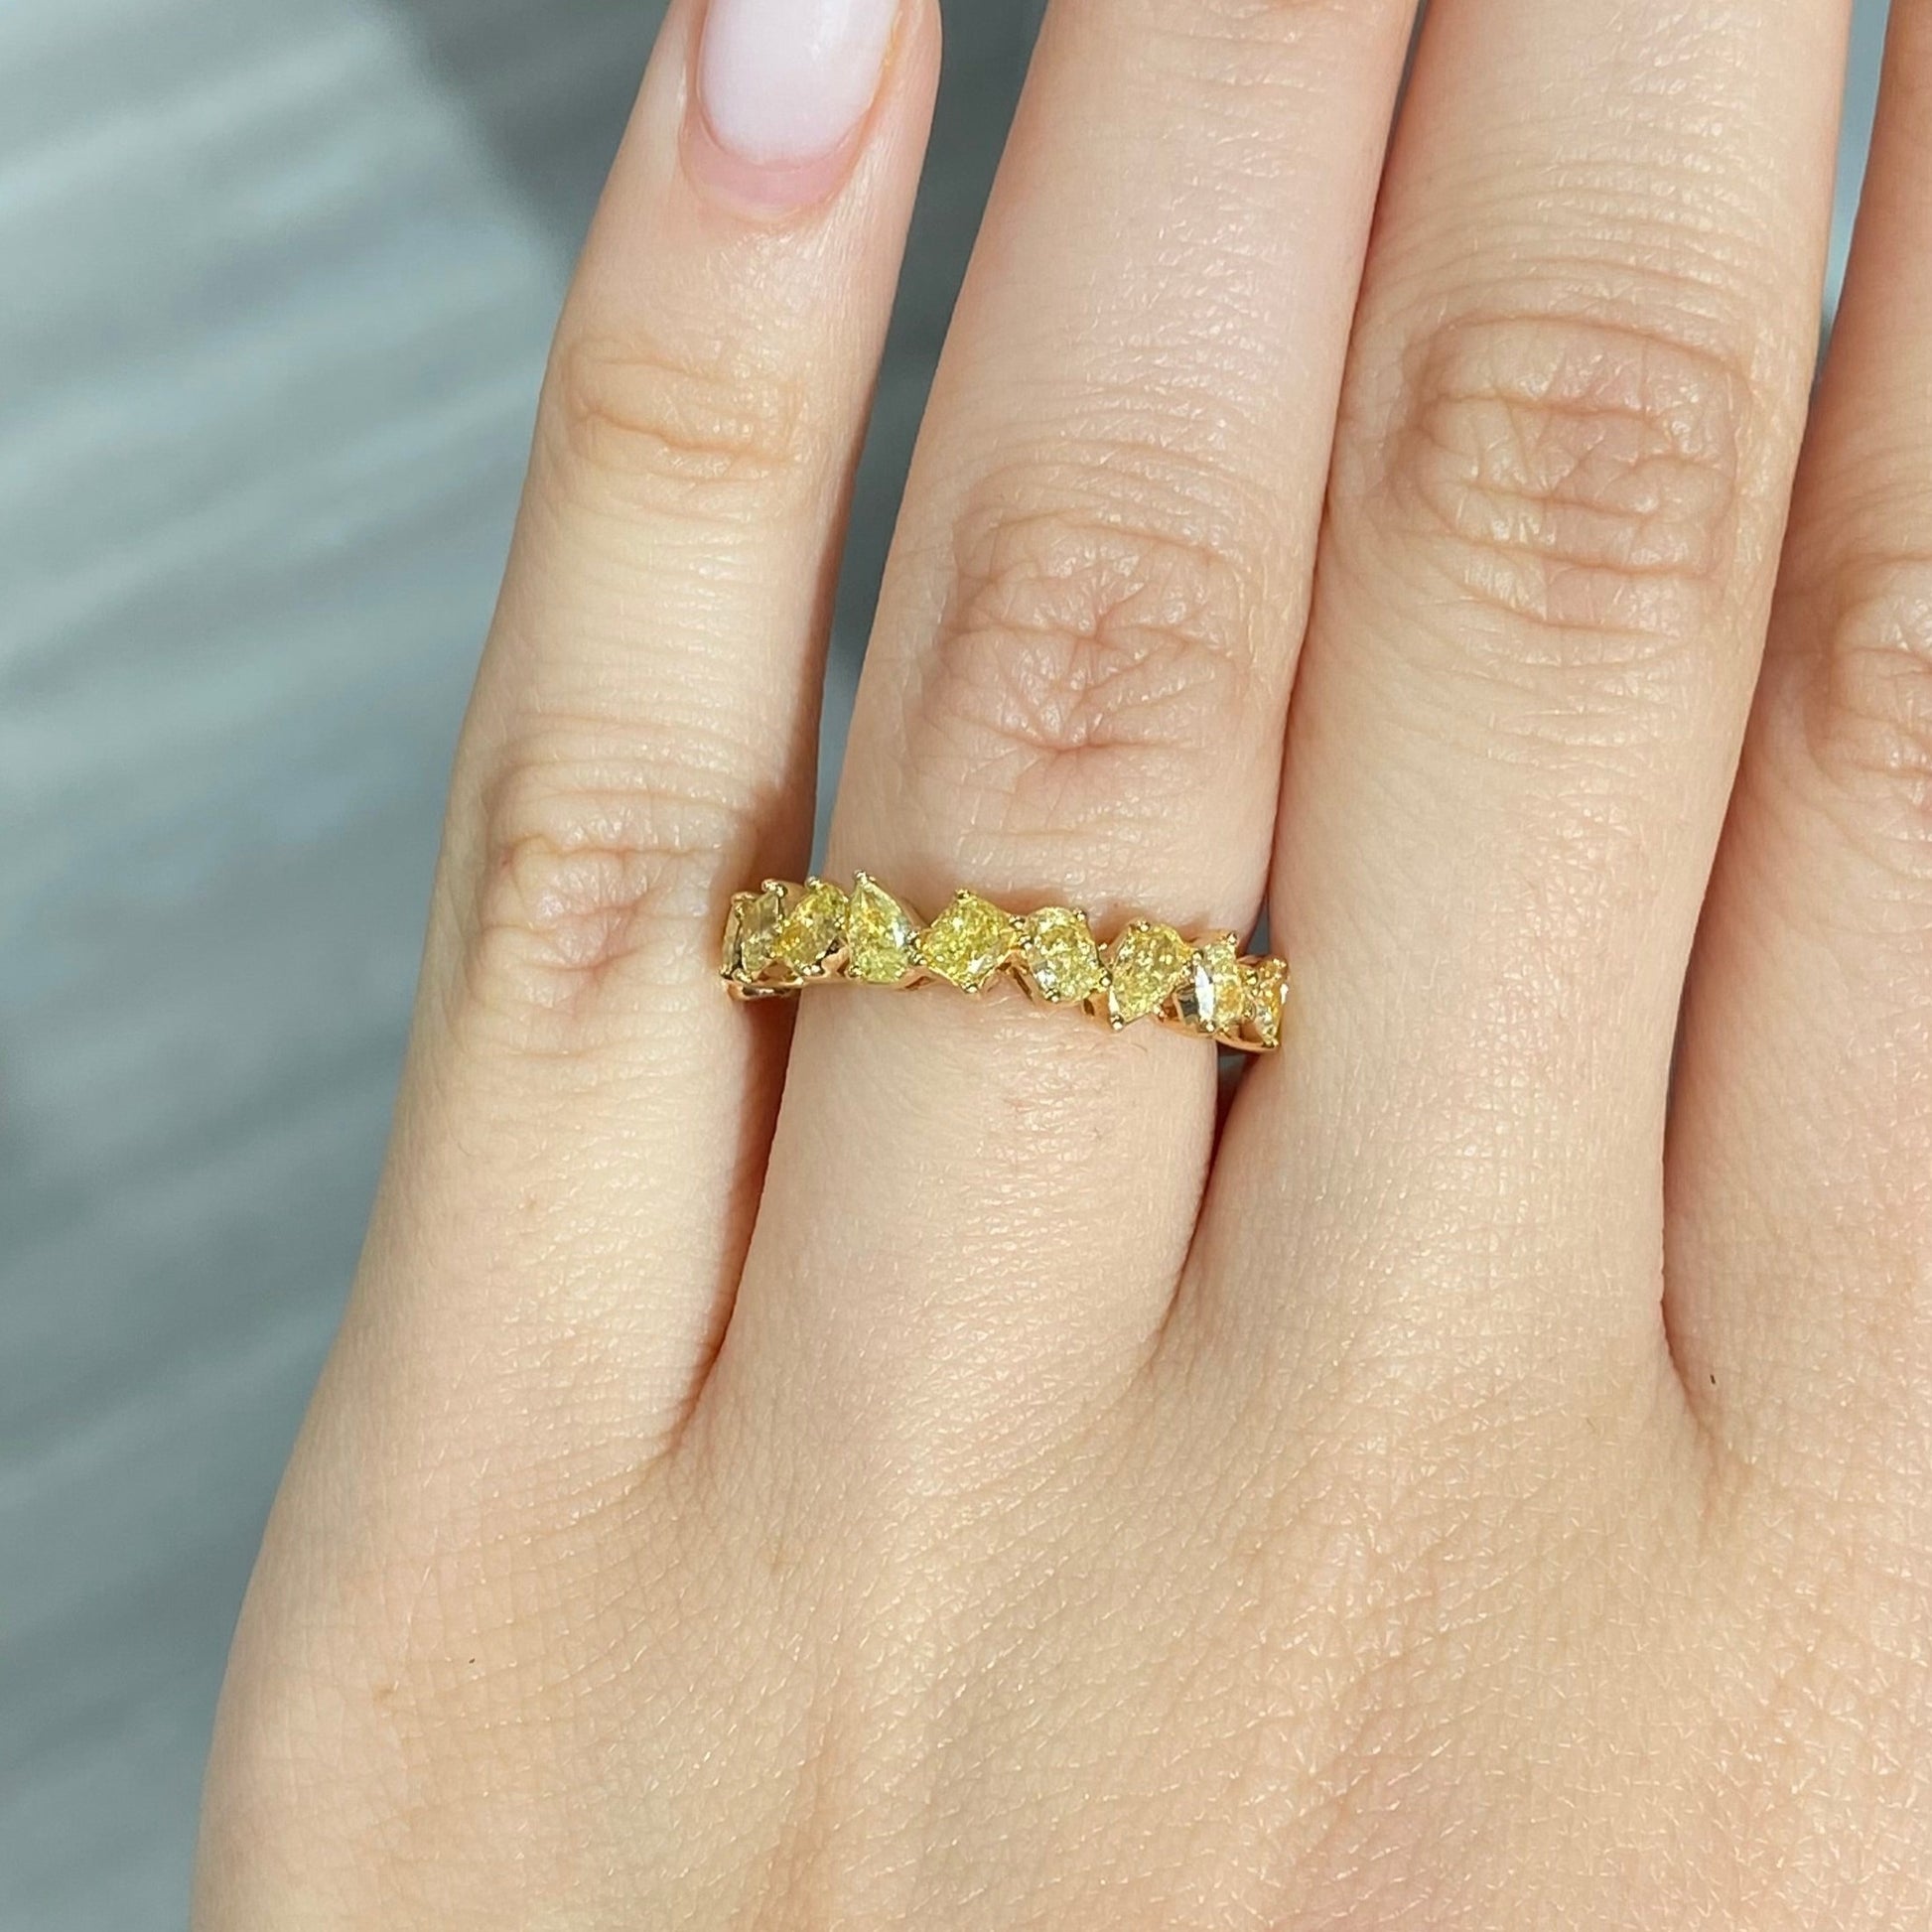 4.77 Carats Total Half Eternity Band with diamonds reaching halfway around the band Mixed Shapes: Heart, Pear, Oval, Cushion, Radiant Diamonds Crafted in 18k Yellow Gold Handmade in NYC